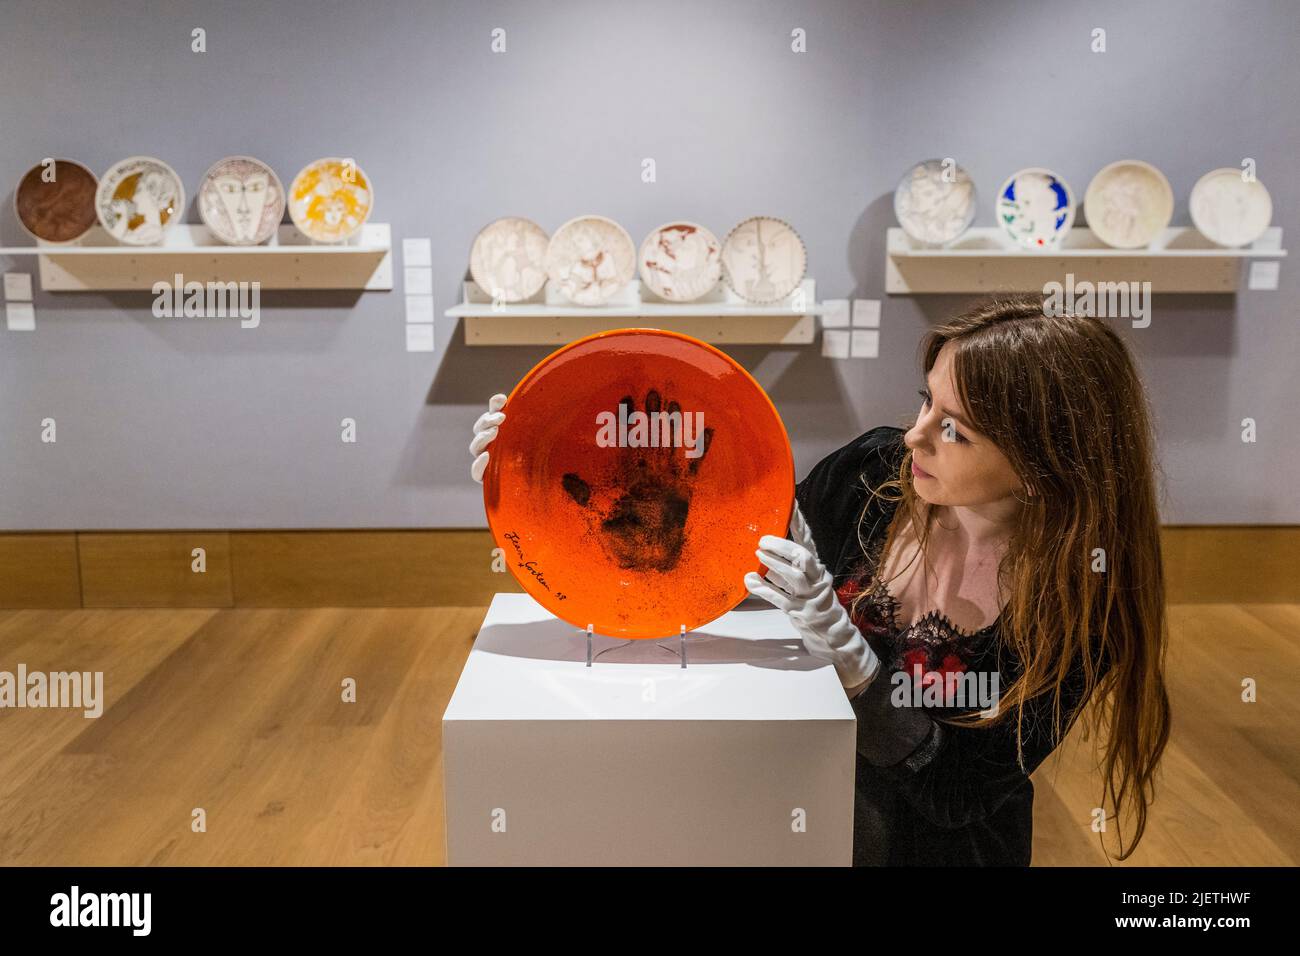 London, UK. 28th June, 2022. Le Main de Poete, Est on request, and other Ceramic plates - A preview of Bonhams' Jean Cocteau and the Madeline-Jolly Workshop sale in New Bond Street. The sale takes place on 29 September 2022, in Paris. Credit: Guy Bell/Alamy Live News Stock Photo